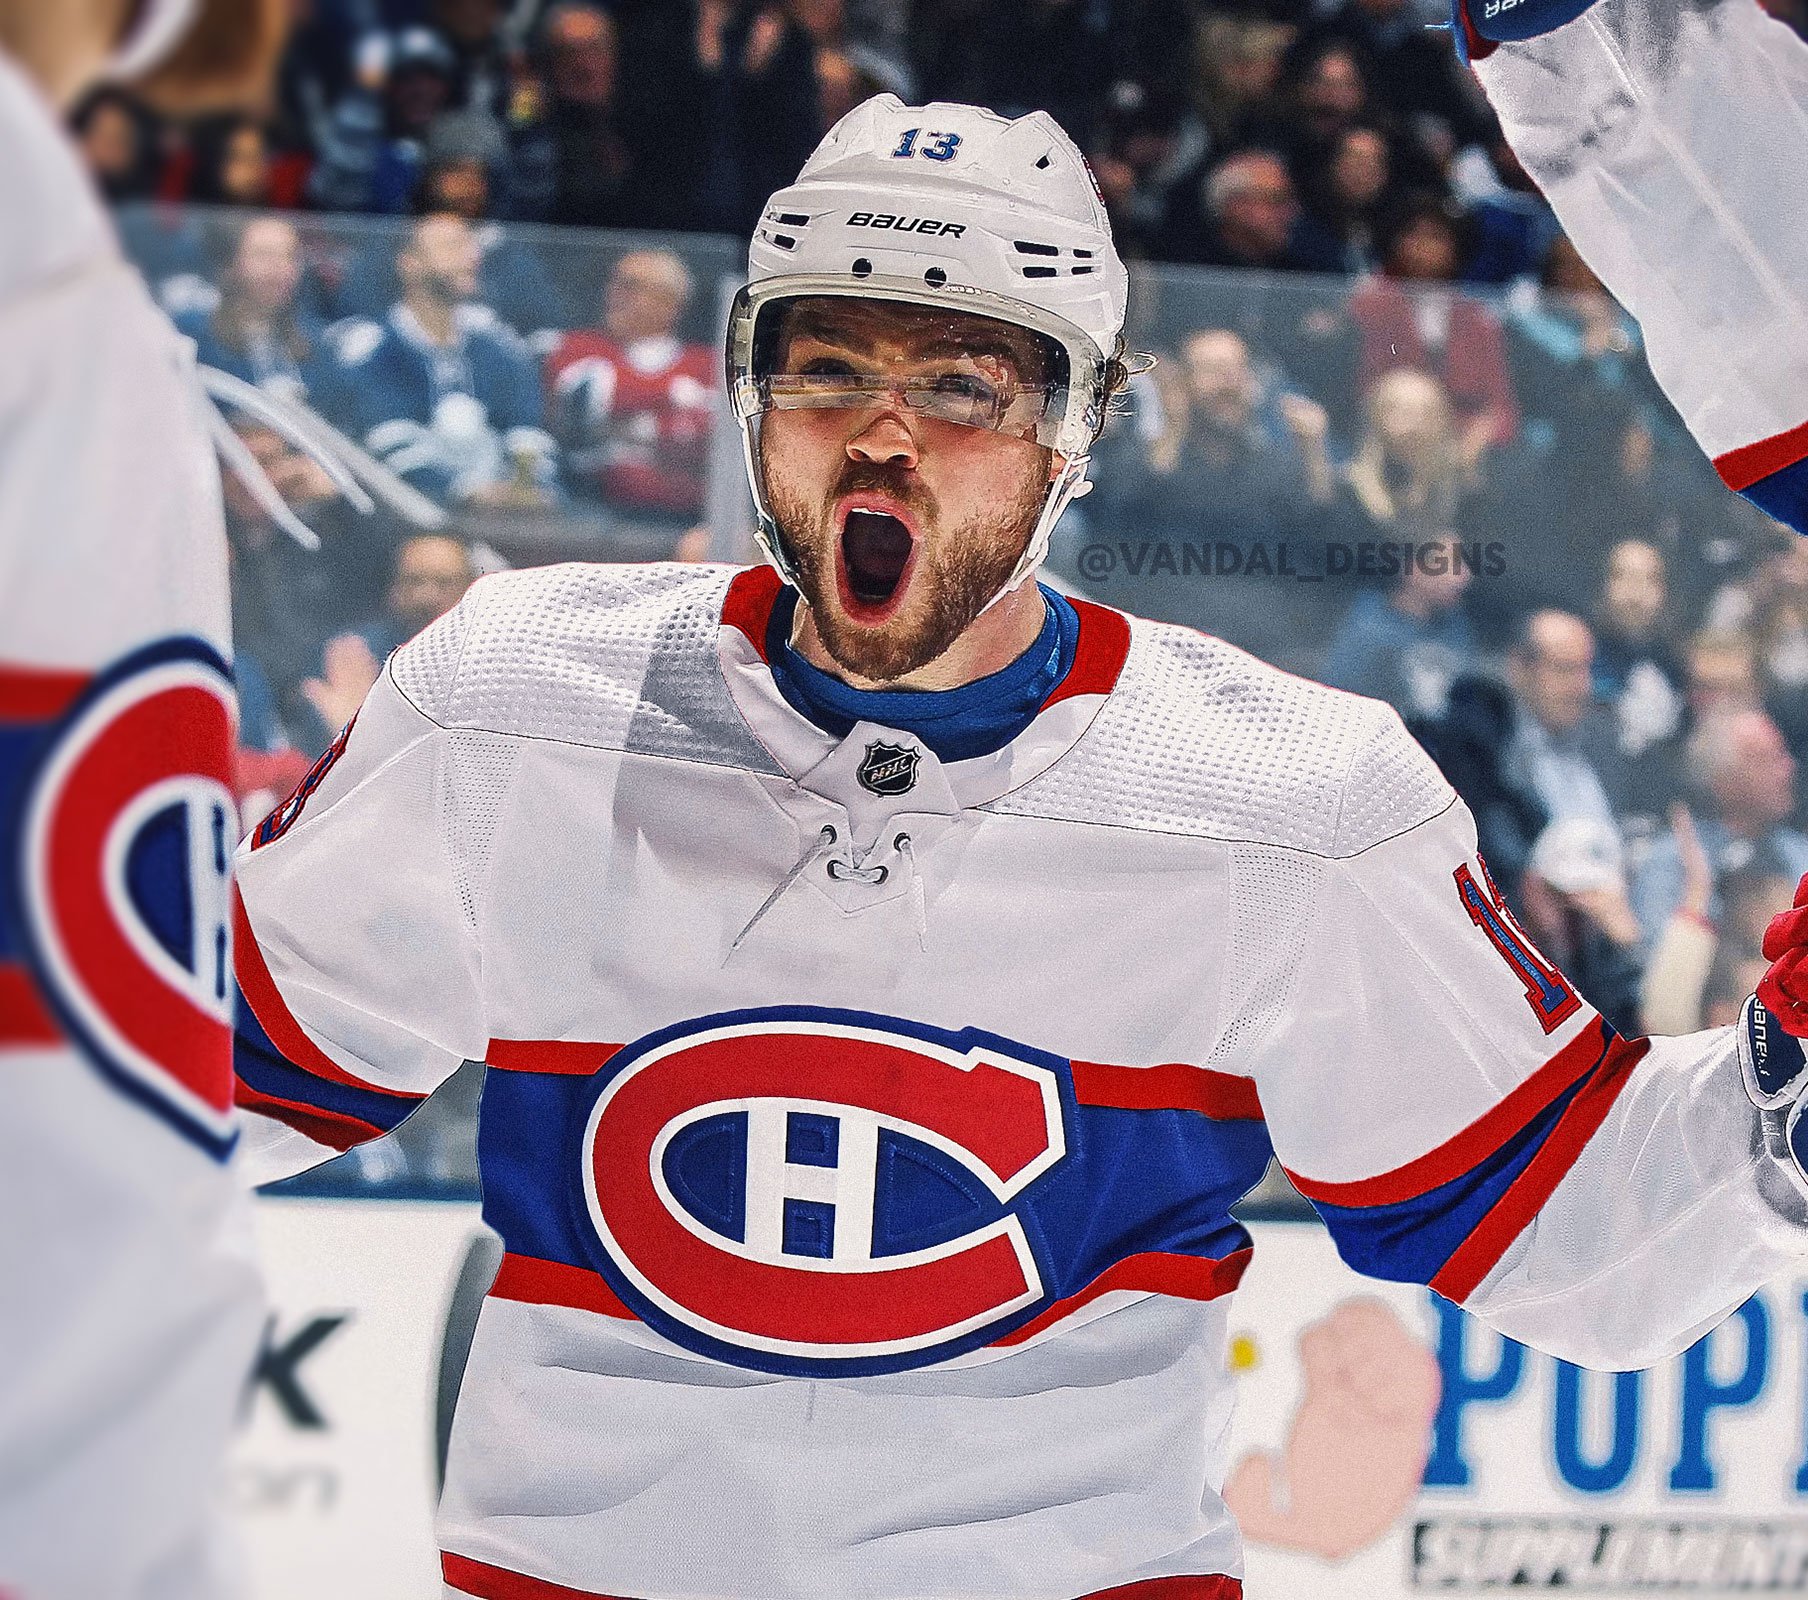 Montreal Canadiens To Adopt A Third/Alternate Jersey in 2013/14